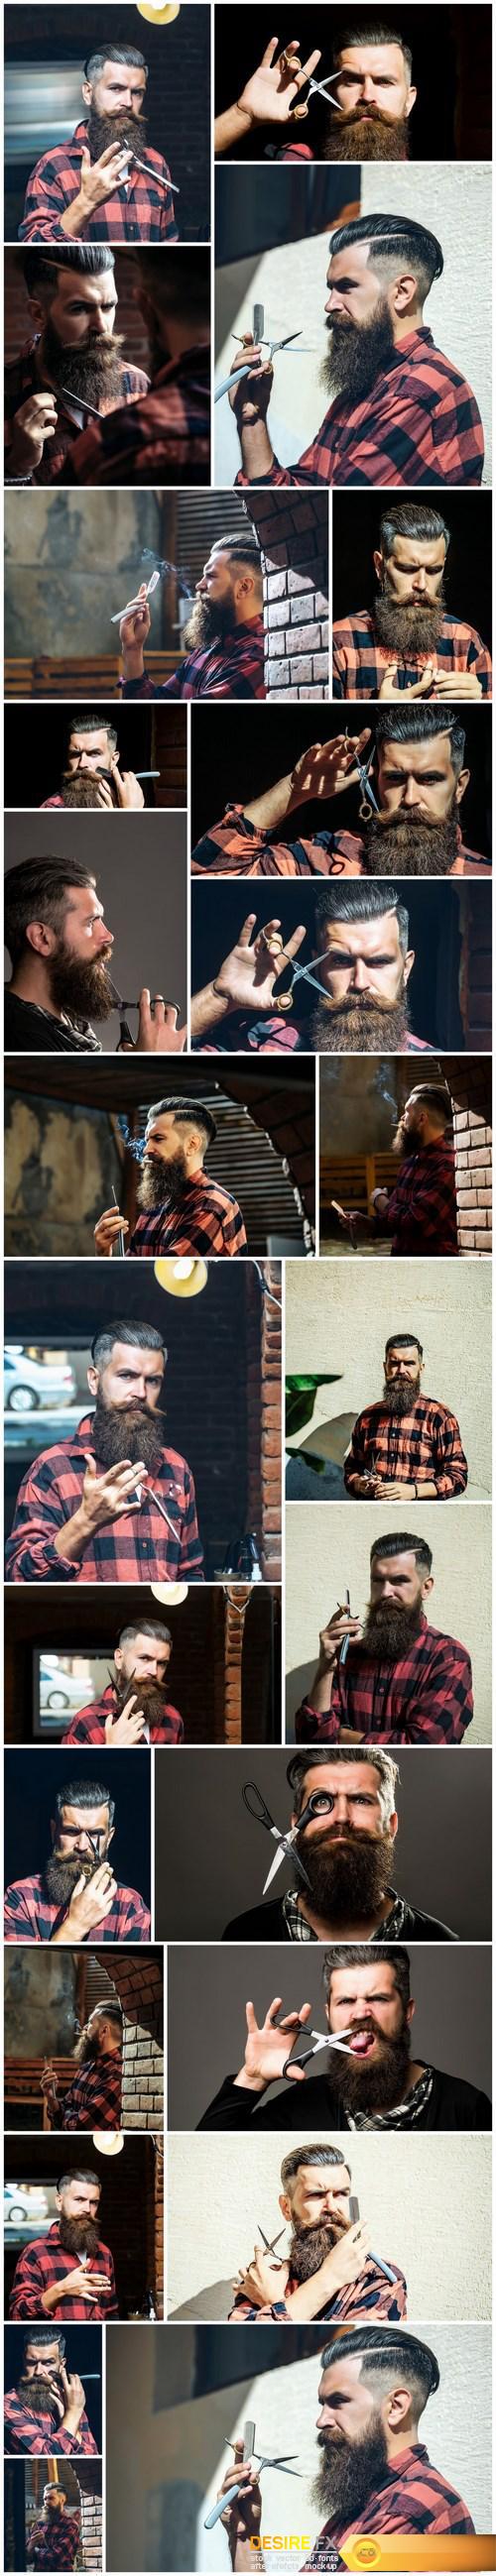 Man with Beard, Brutal Style, Hipster 4 - 25xUHQ JPEG Photo Stock